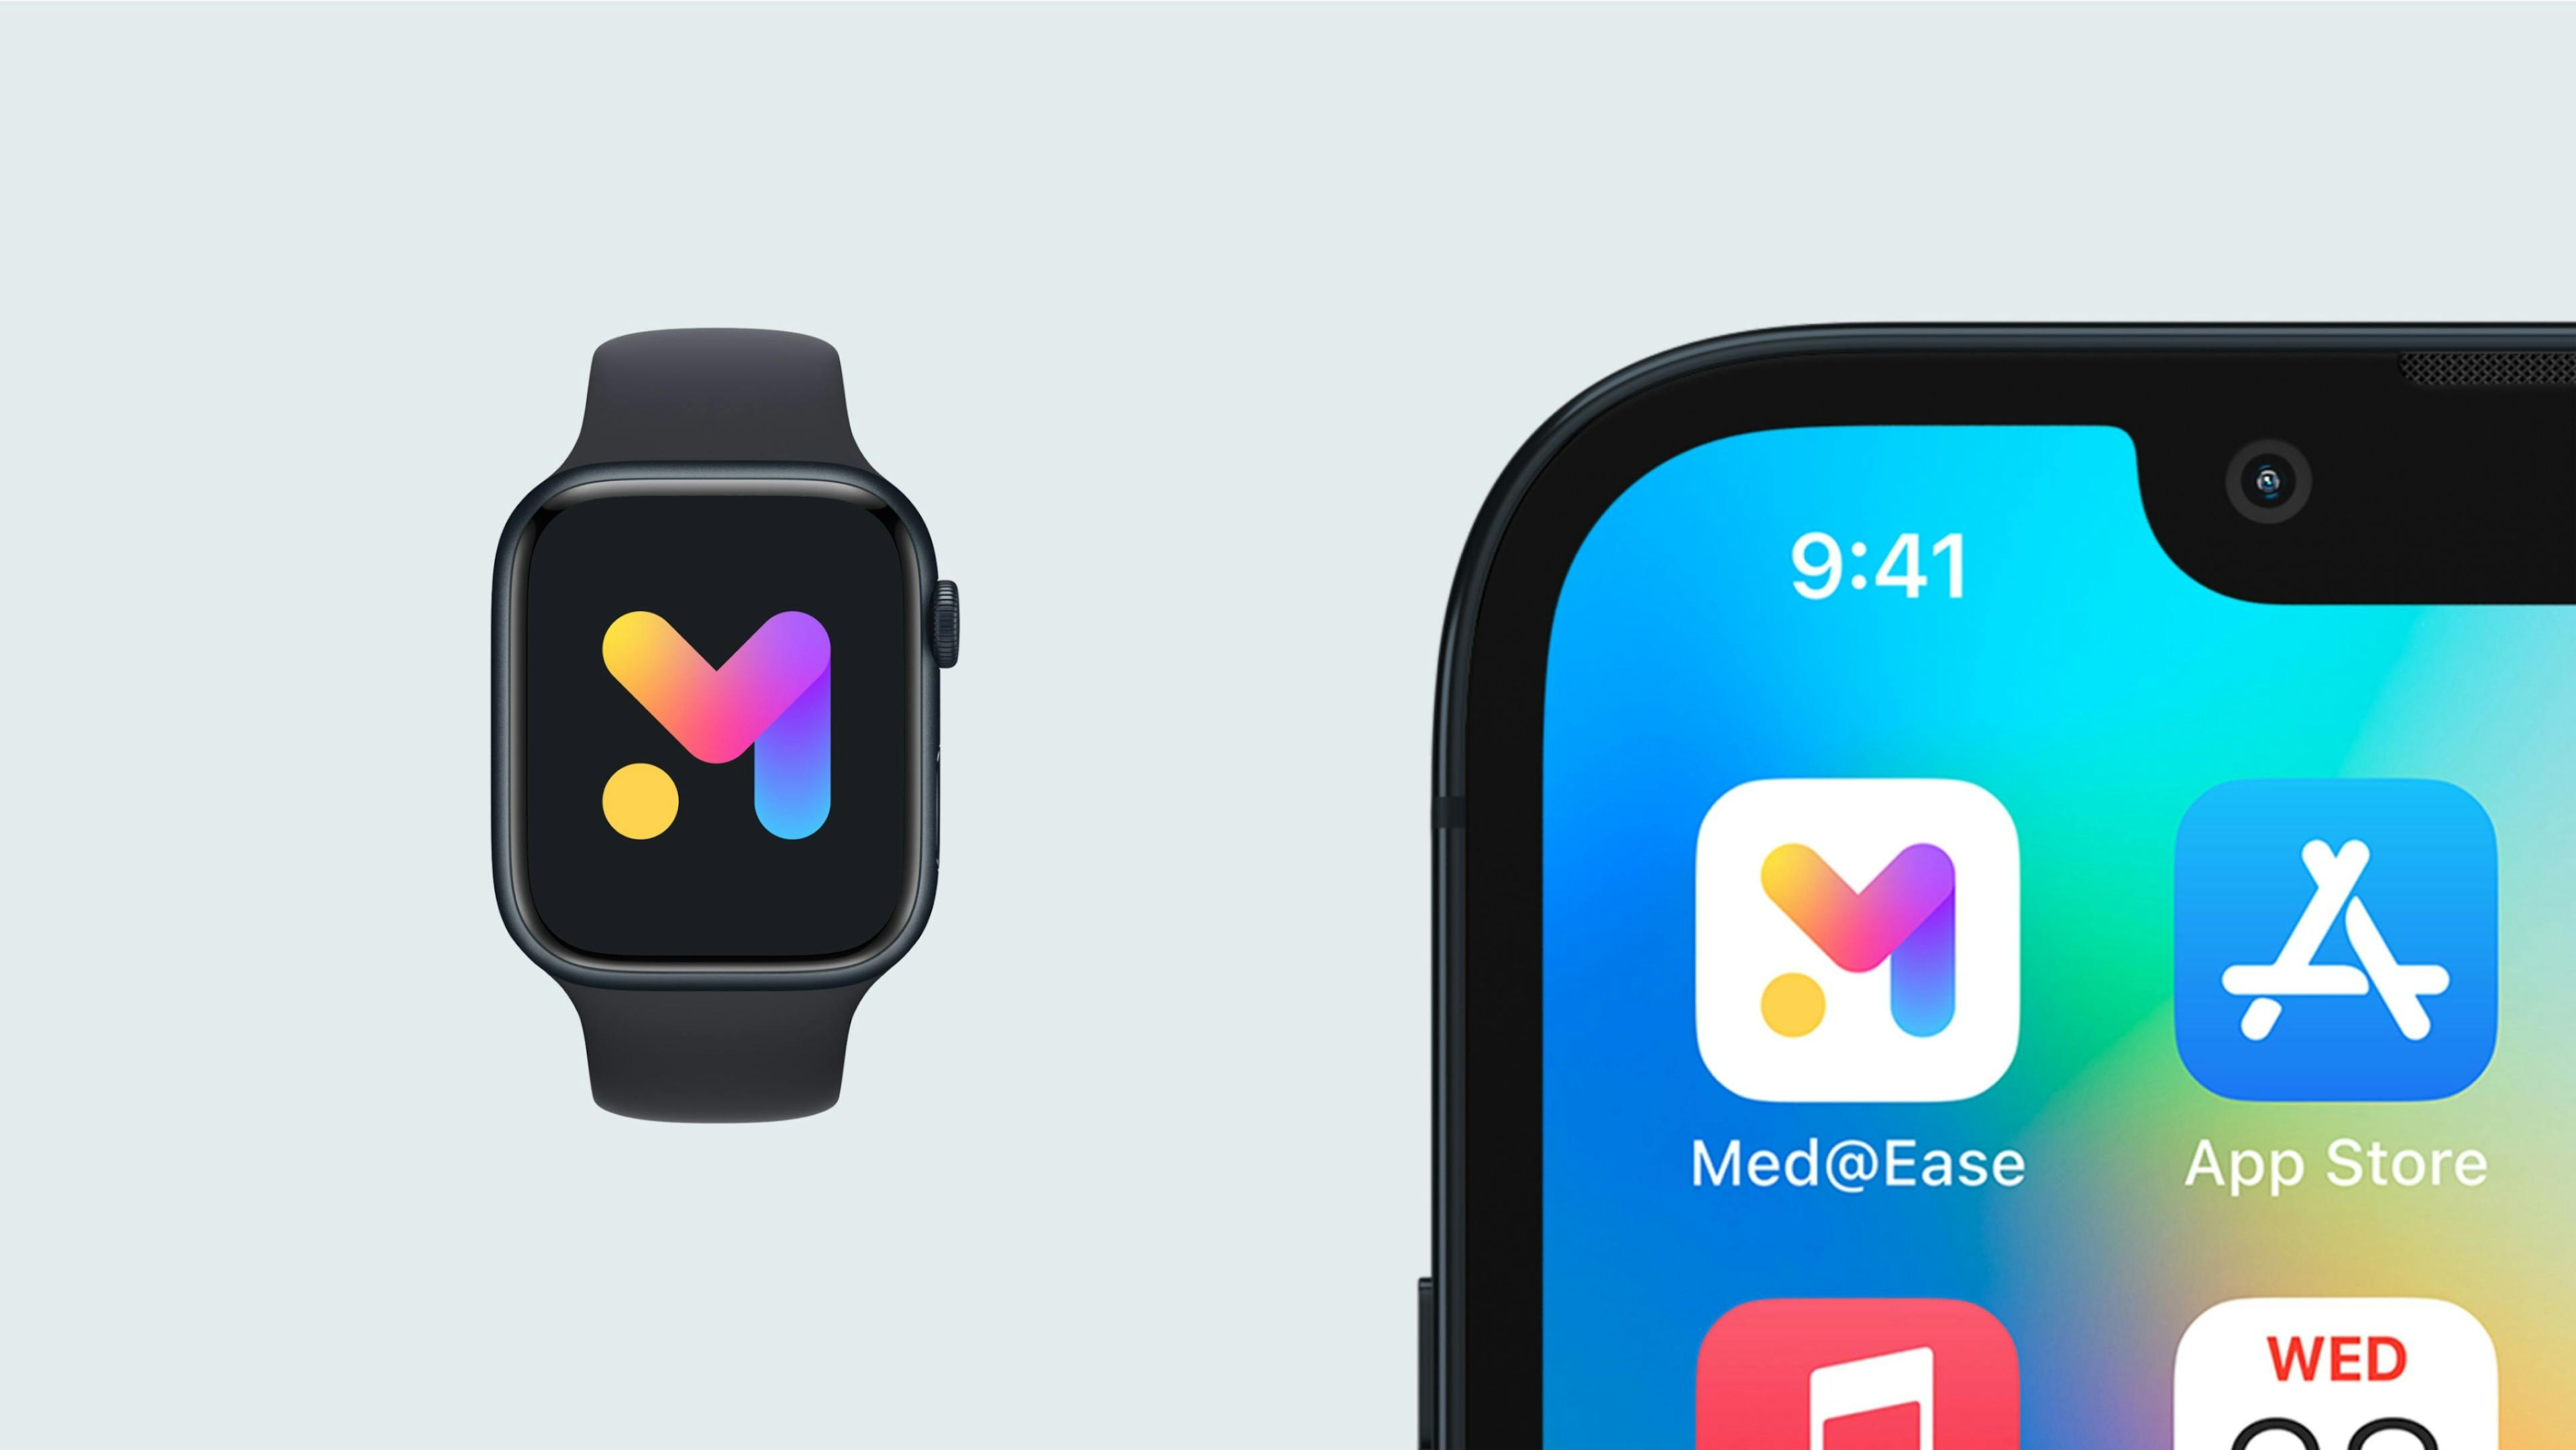 Showcasing Med@Ease's logo and app icon design on iPhone 13 and iWatch mockups